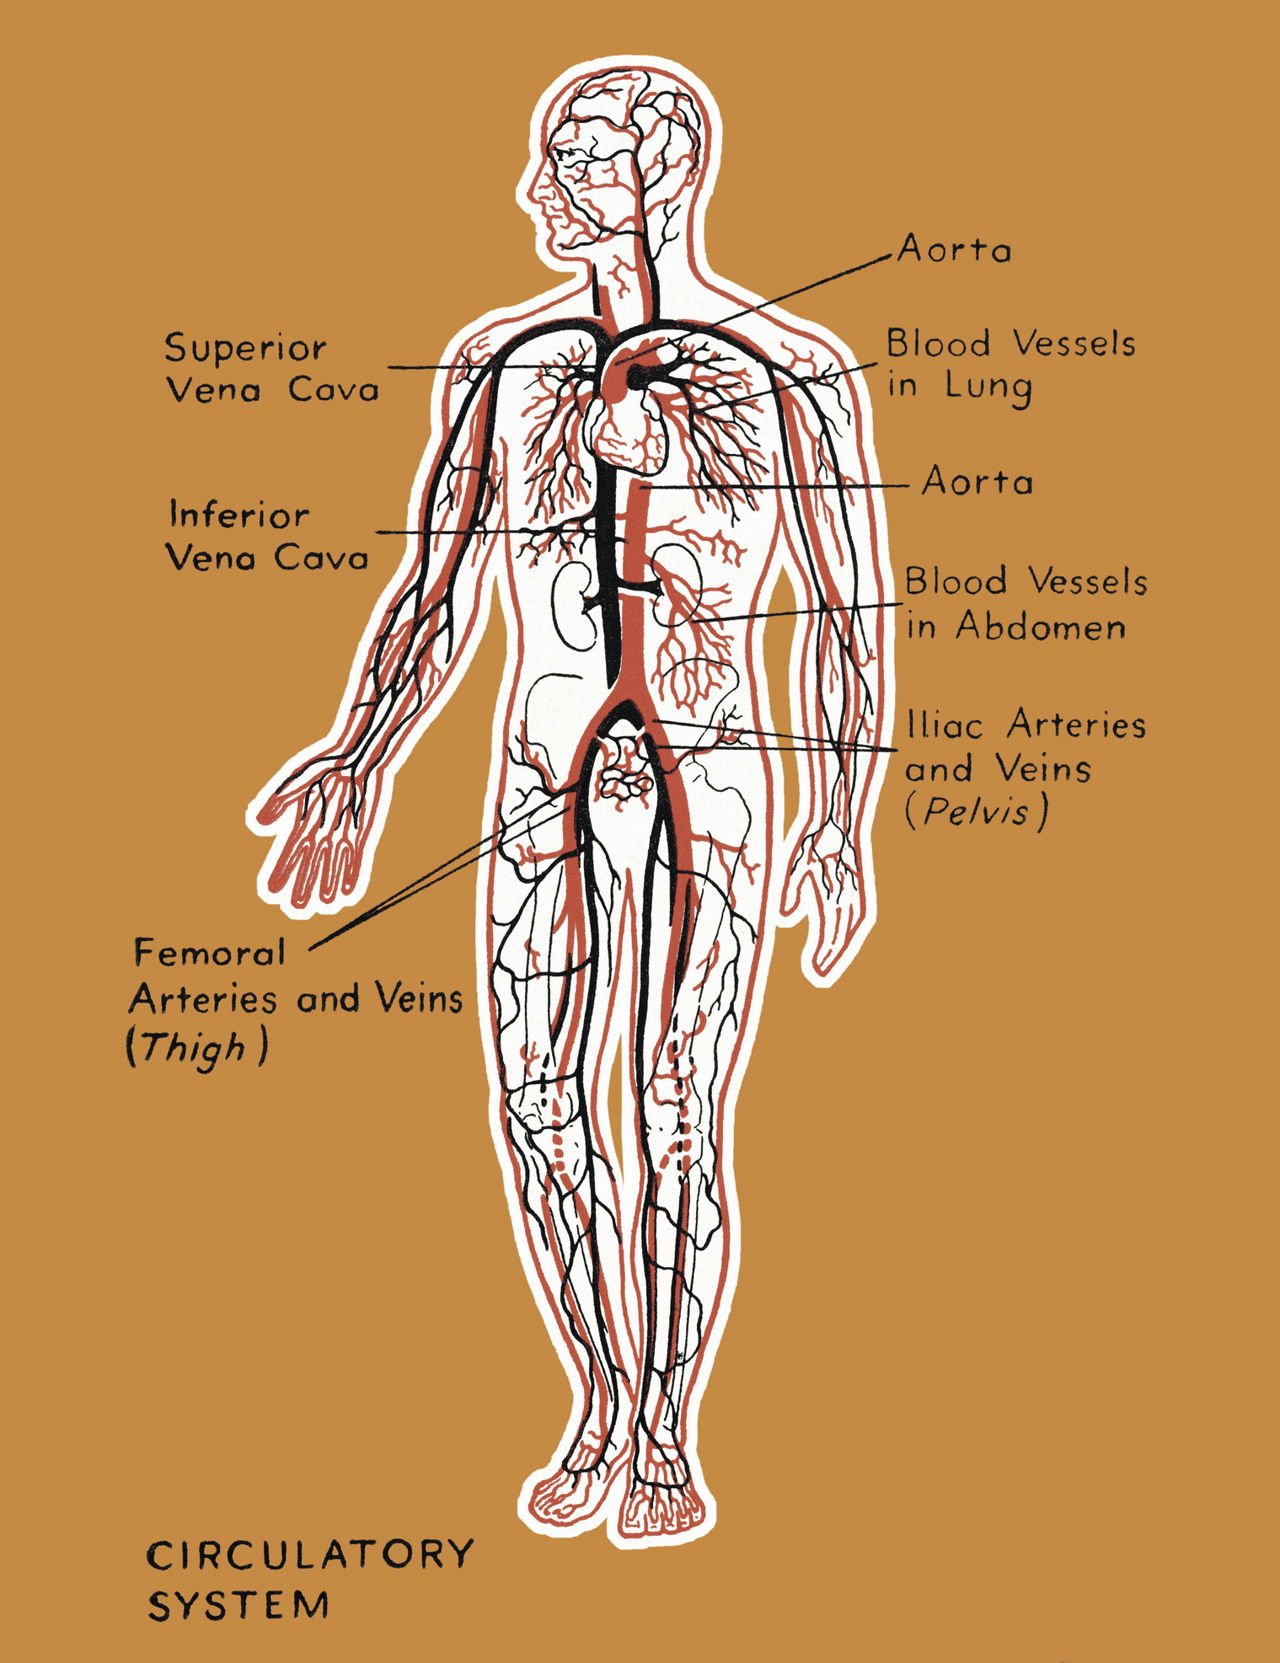 Circulatory System Organs and Their Functions - Bodytomy